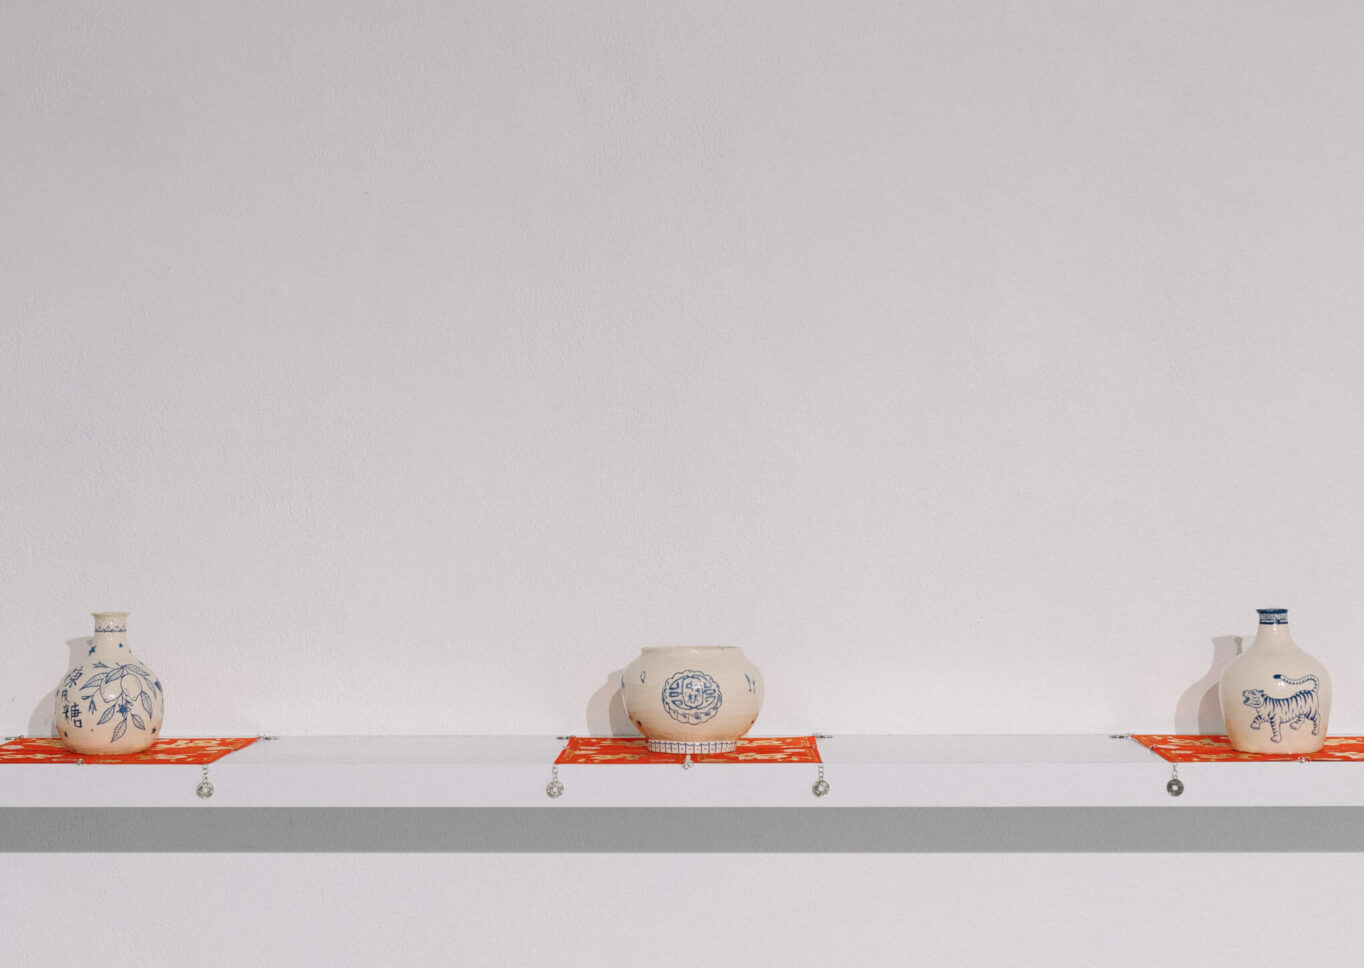 Three cream ceramic vessels of different shapes with blue images on them, presented at equal distances on red square fabric, on a floating white shelf.